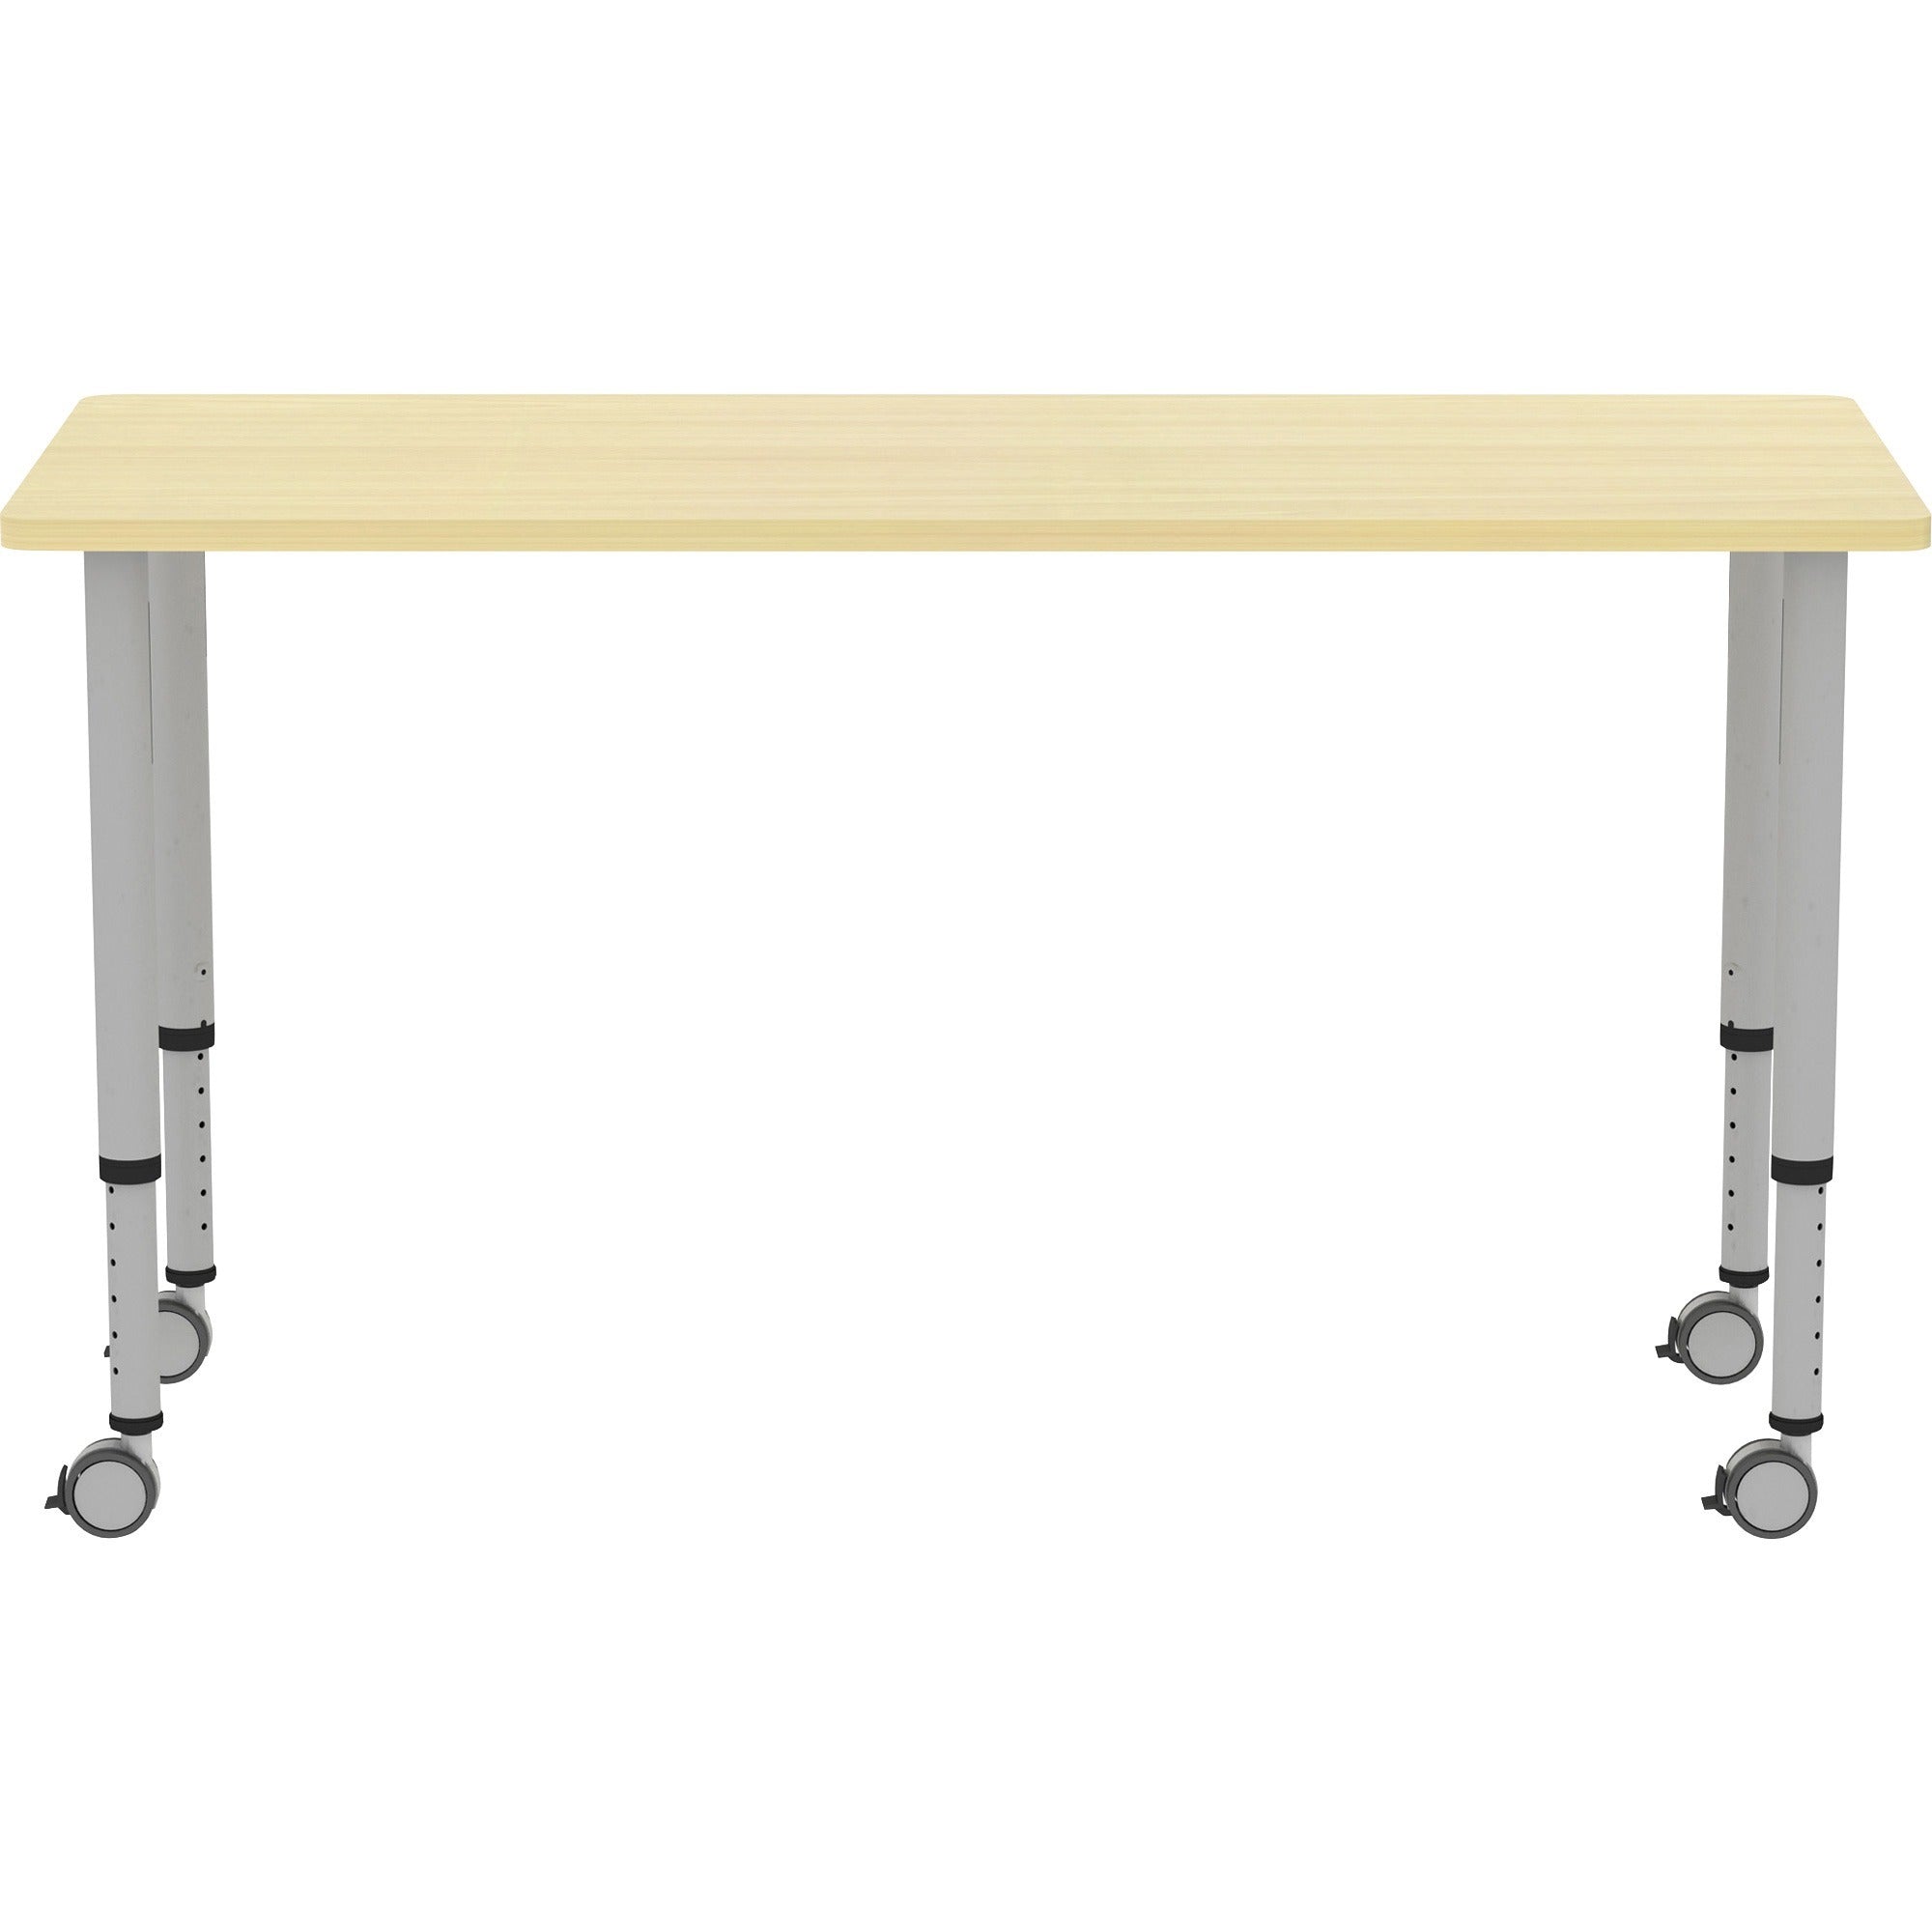 lorell-attune-height-adjustable-multipurpose-rectangular-table-for-table-toprectangle-top-adjustable-height-2662-to-3362-adjustment-x-60-table-top-width-x-2362-table-top-depth-3362-height-assembly-required-laminated-maple-la_llr69580 - 5